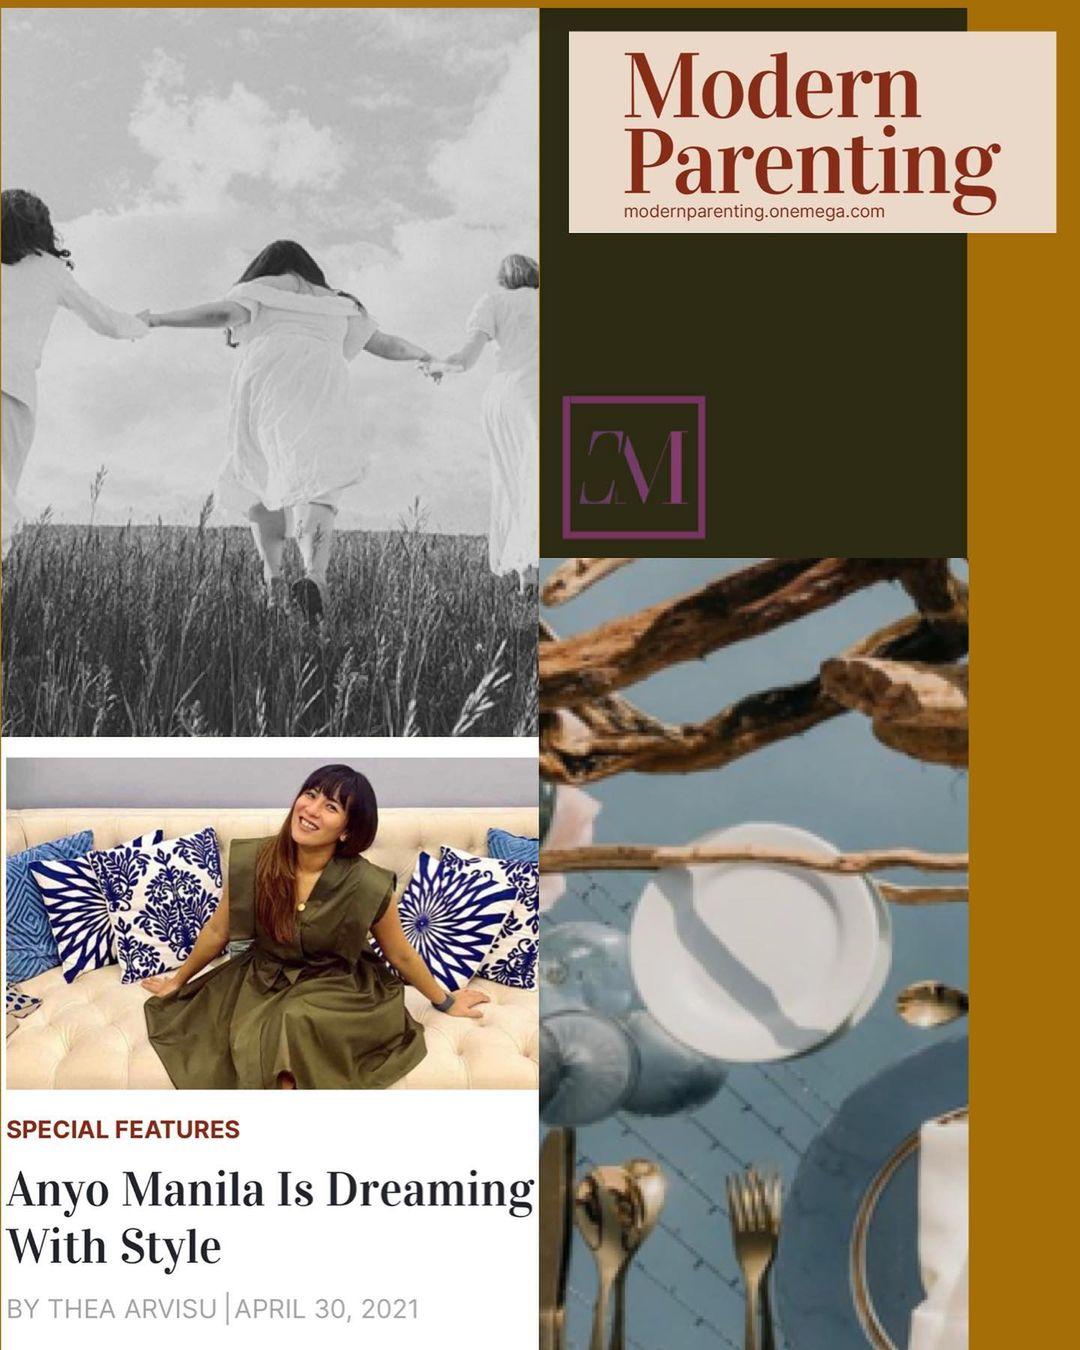 class="content__text"A big honor and thank you to @modernparentingph for the feature. ❤️ It feels surreal!! 

Here’s the link: https://modernparenting.onemega.com/anyo-manila/